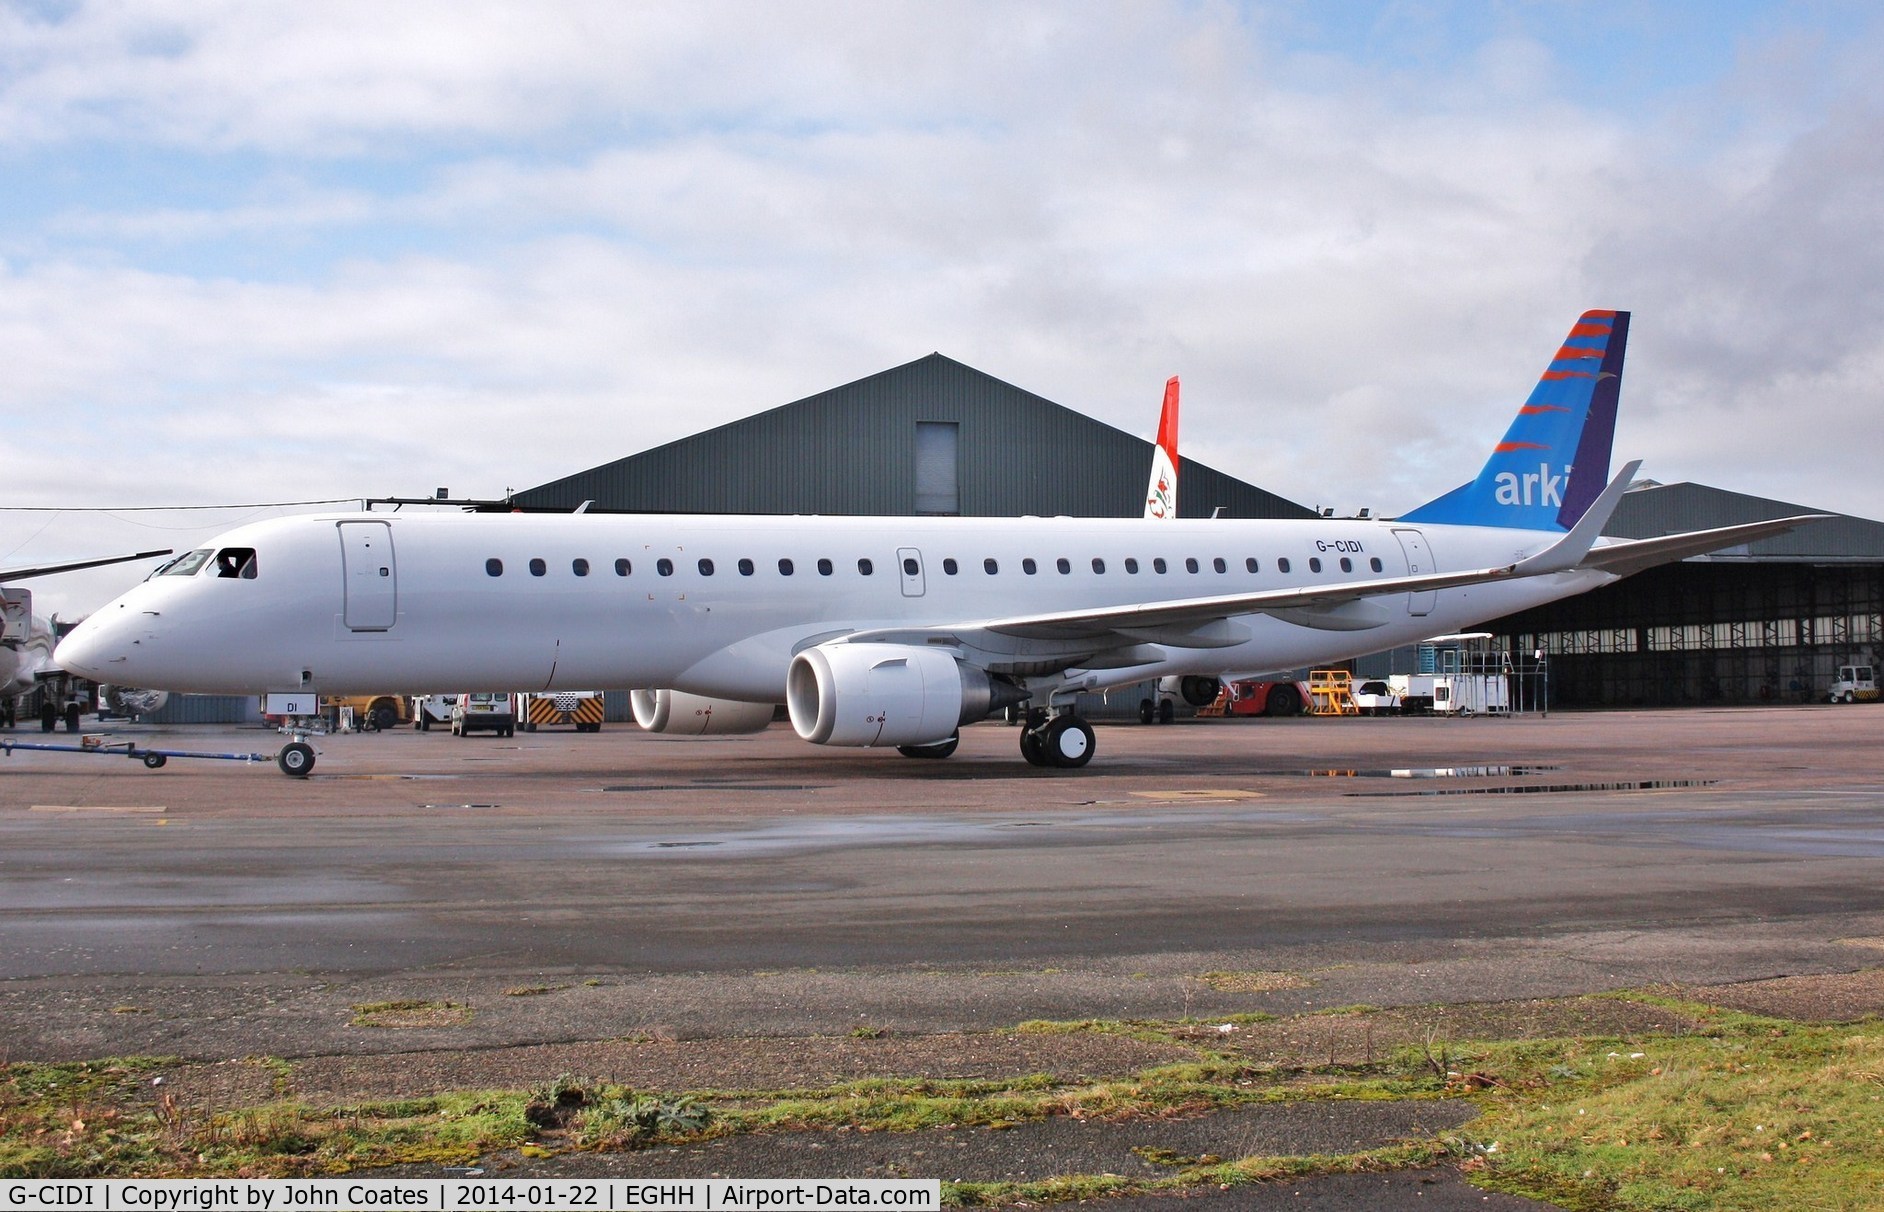 G-CIDI, 2013 Embraer 190LR (ERJ-190-100LR) C/N 19000616, Repainting to Arkia livery not completed